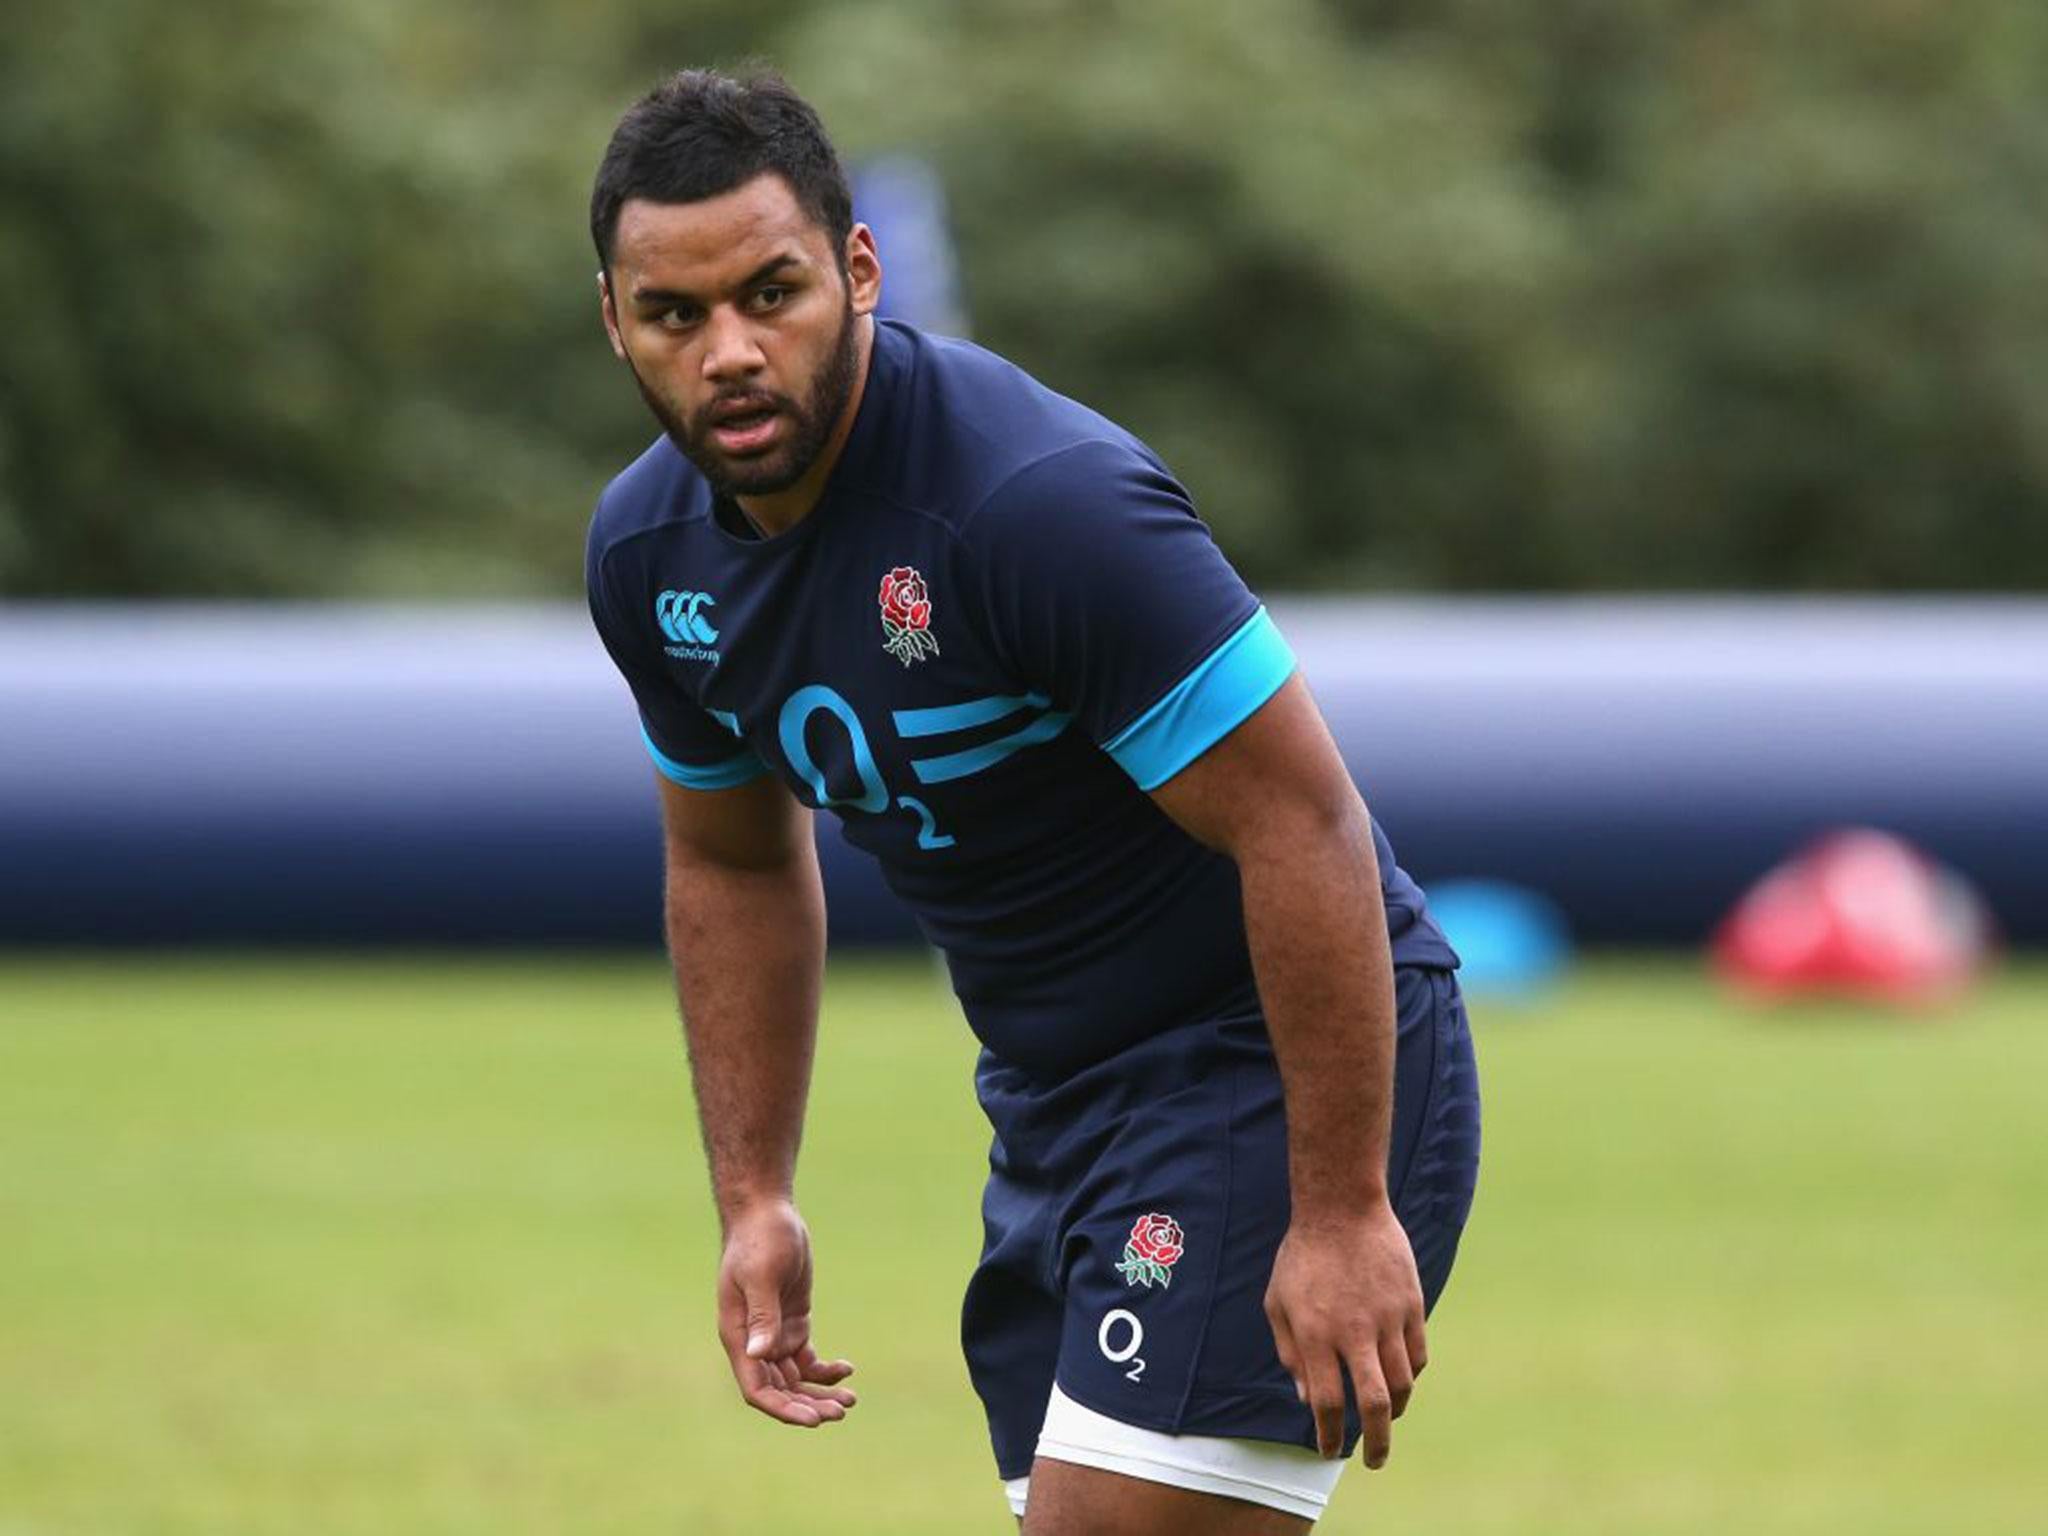 The no 8 has grown into one of England's most influential players